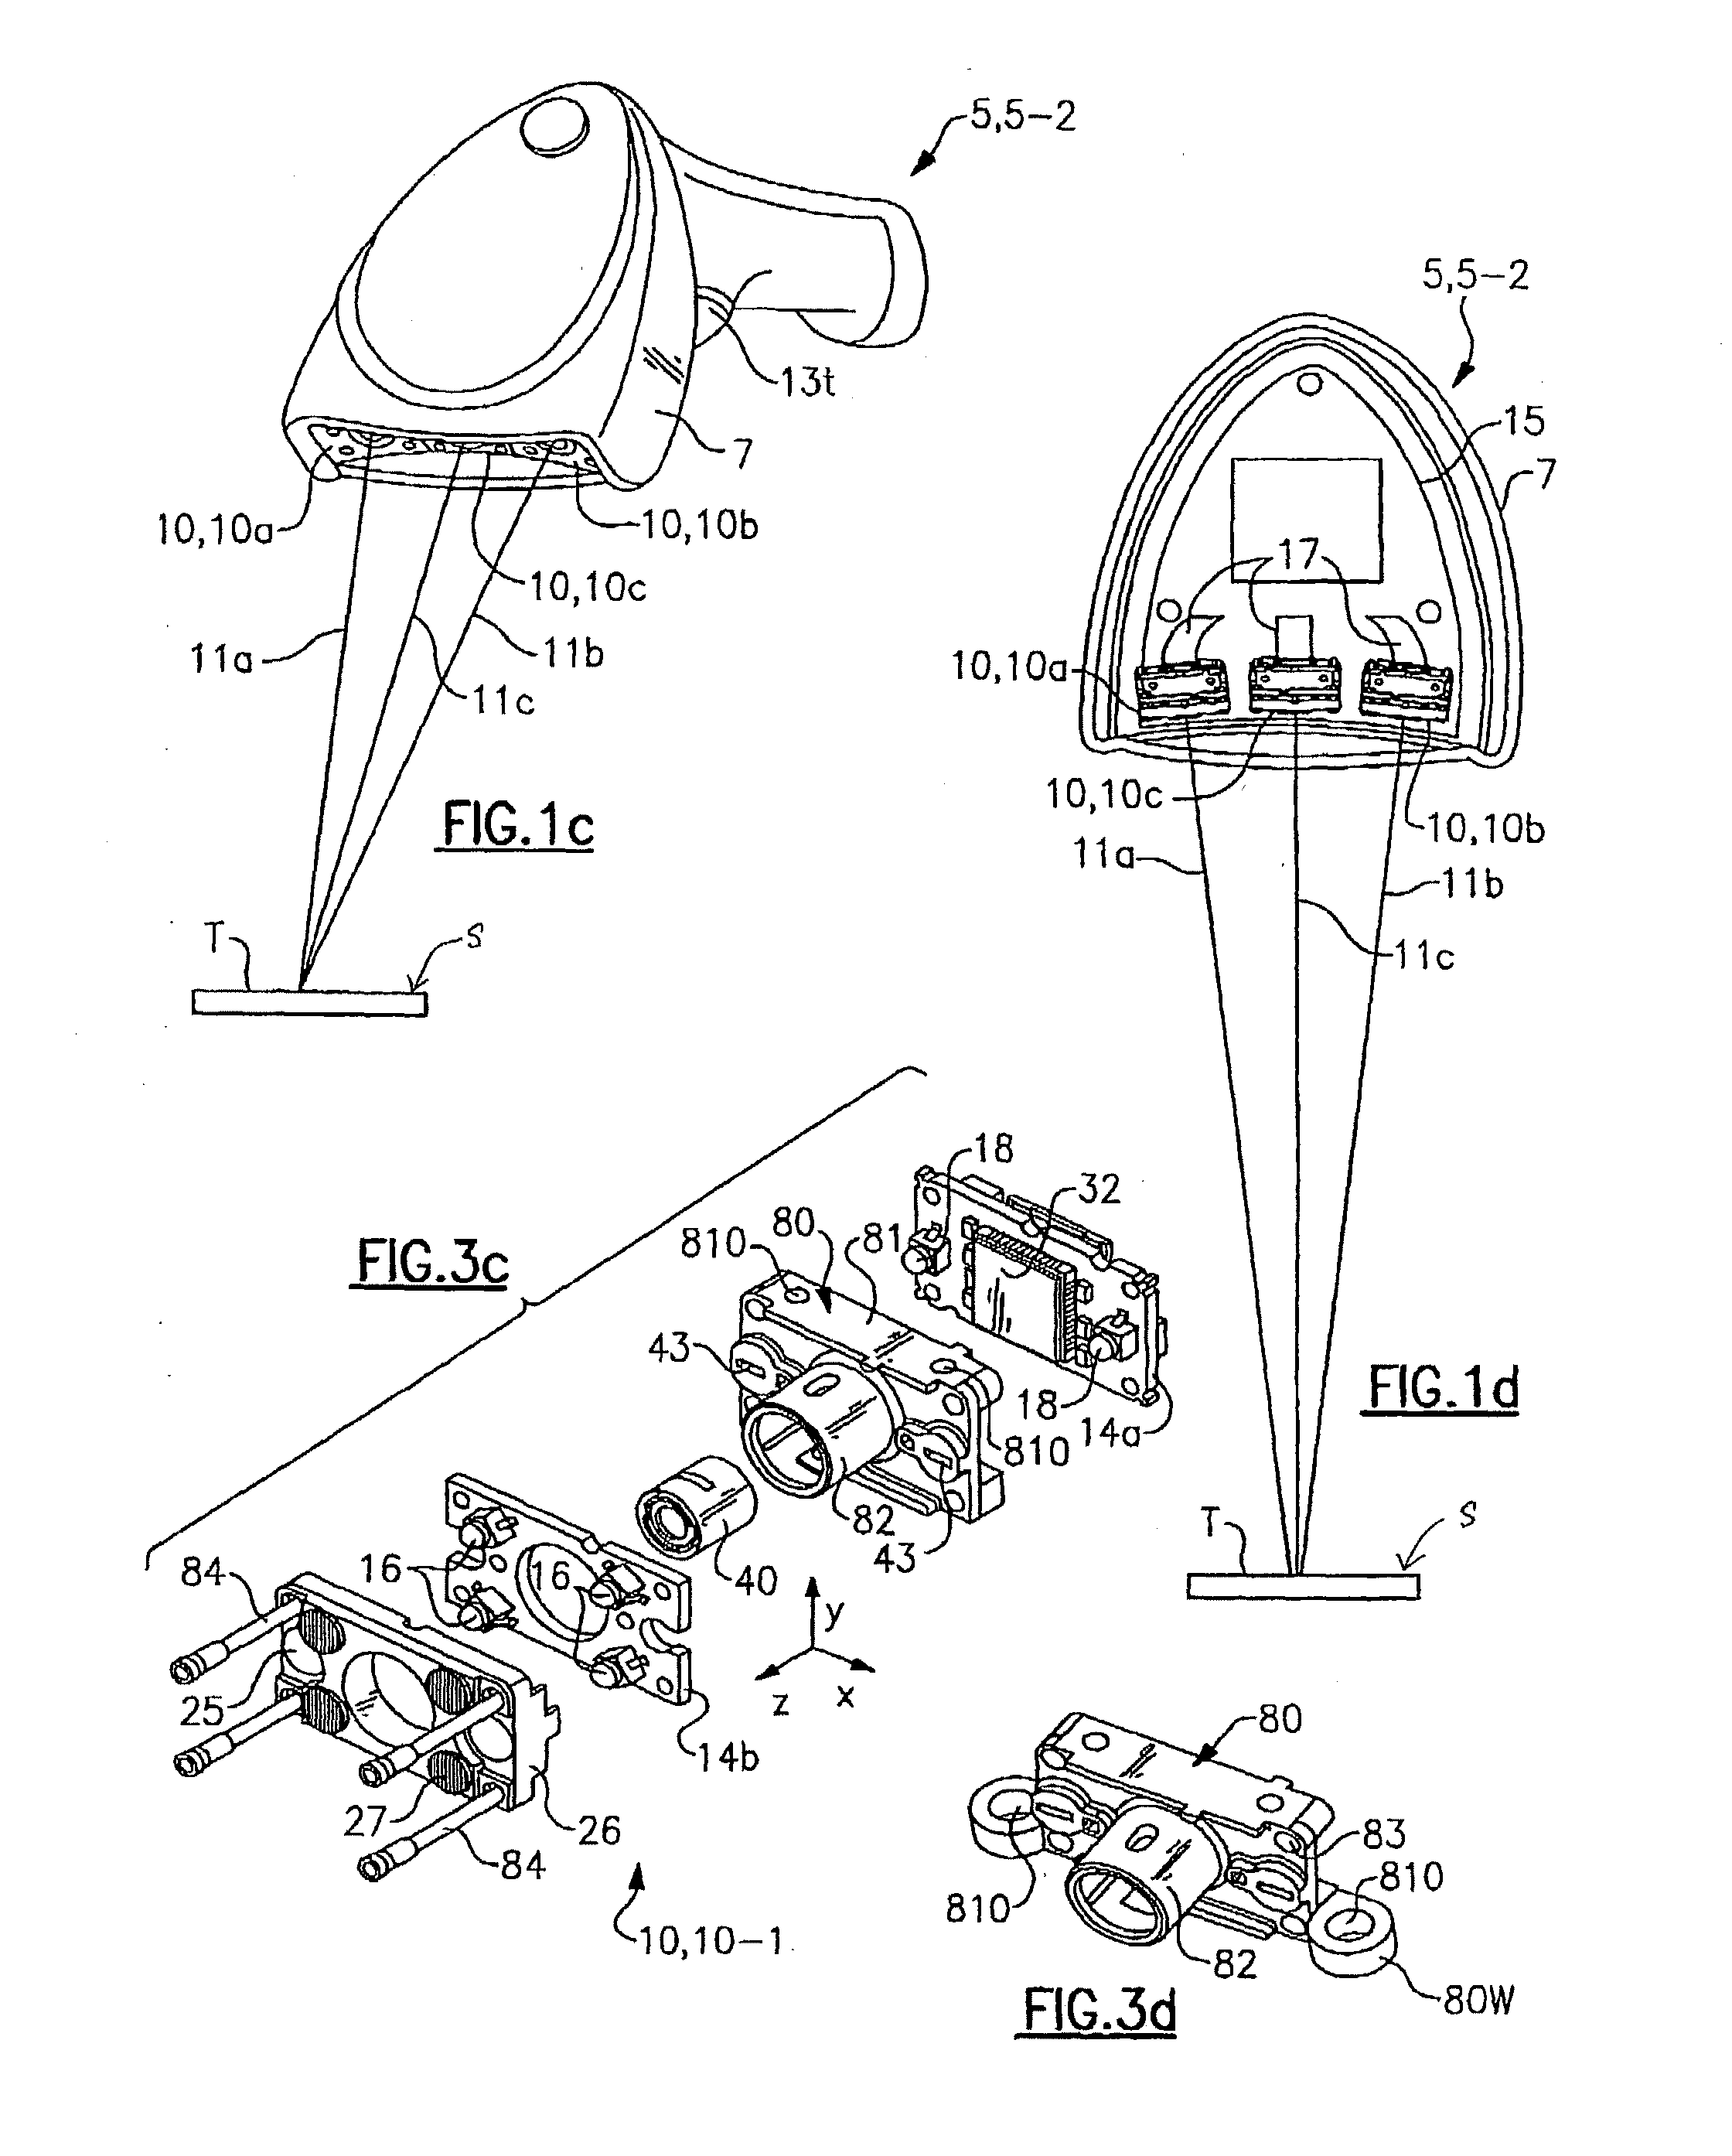 Apparatus operative for capture of image data